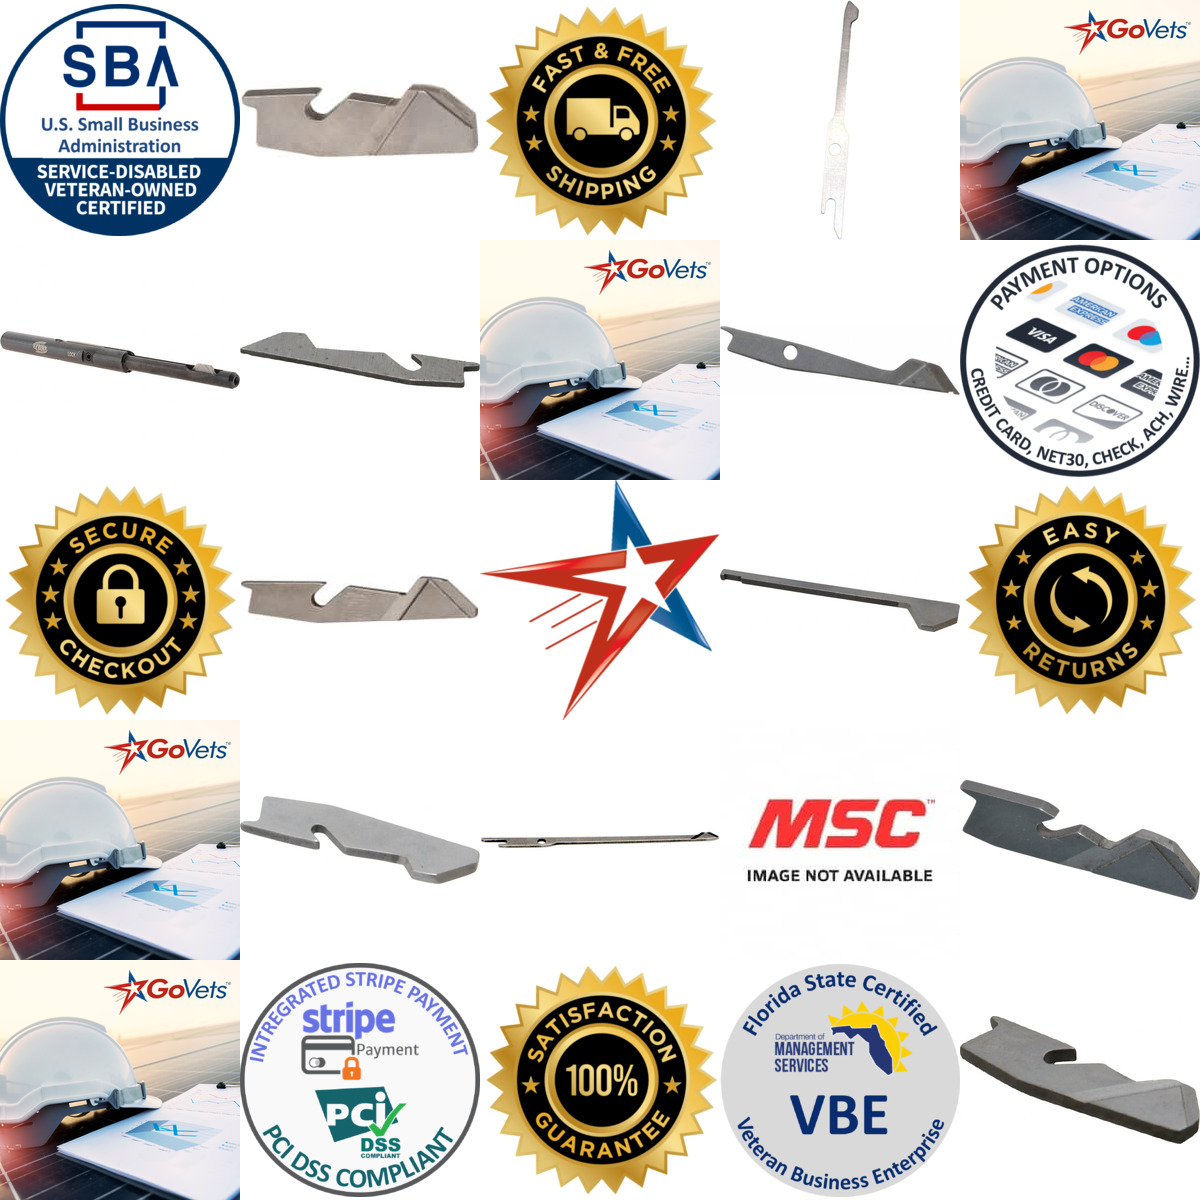 A selection of Power Deburring Blades products on GoVets